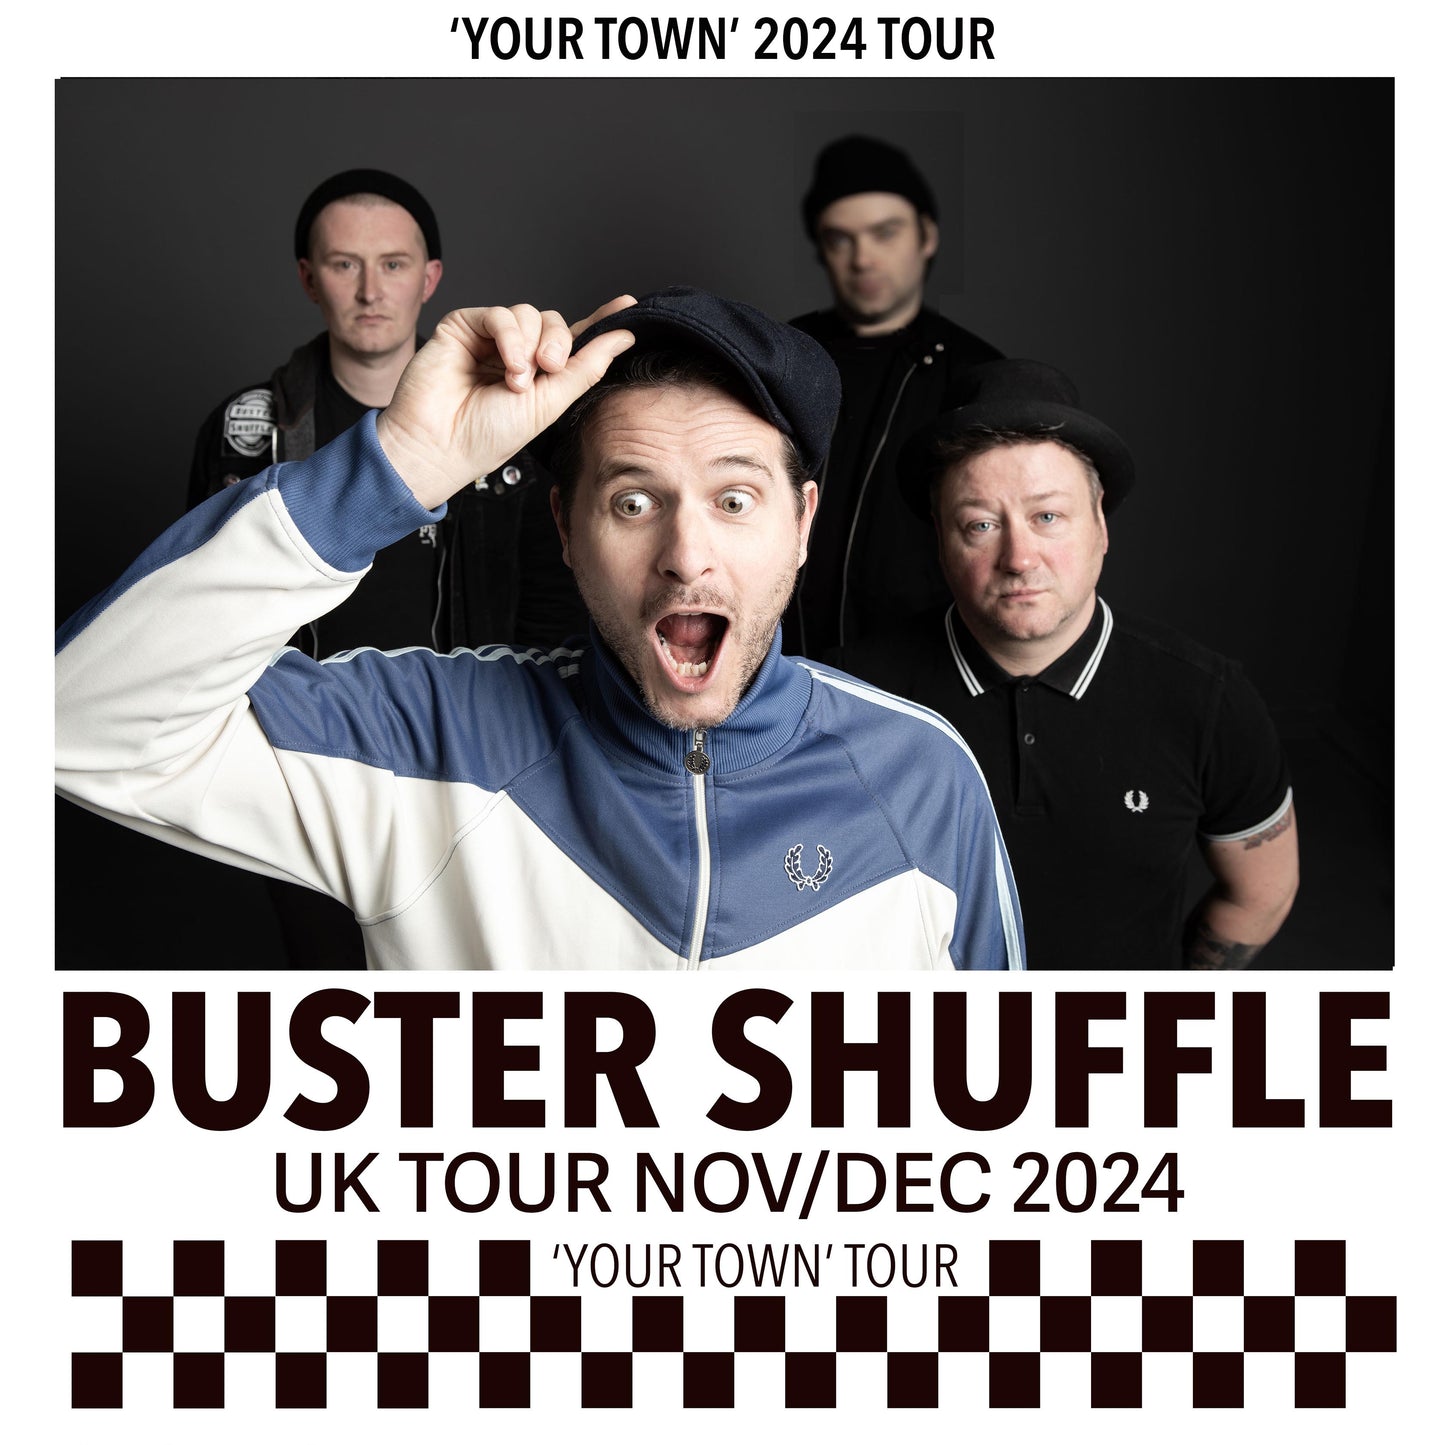 DERBY/ Buster Shuffle/ Live/  Sat 02/11/24 The Hairy Dog